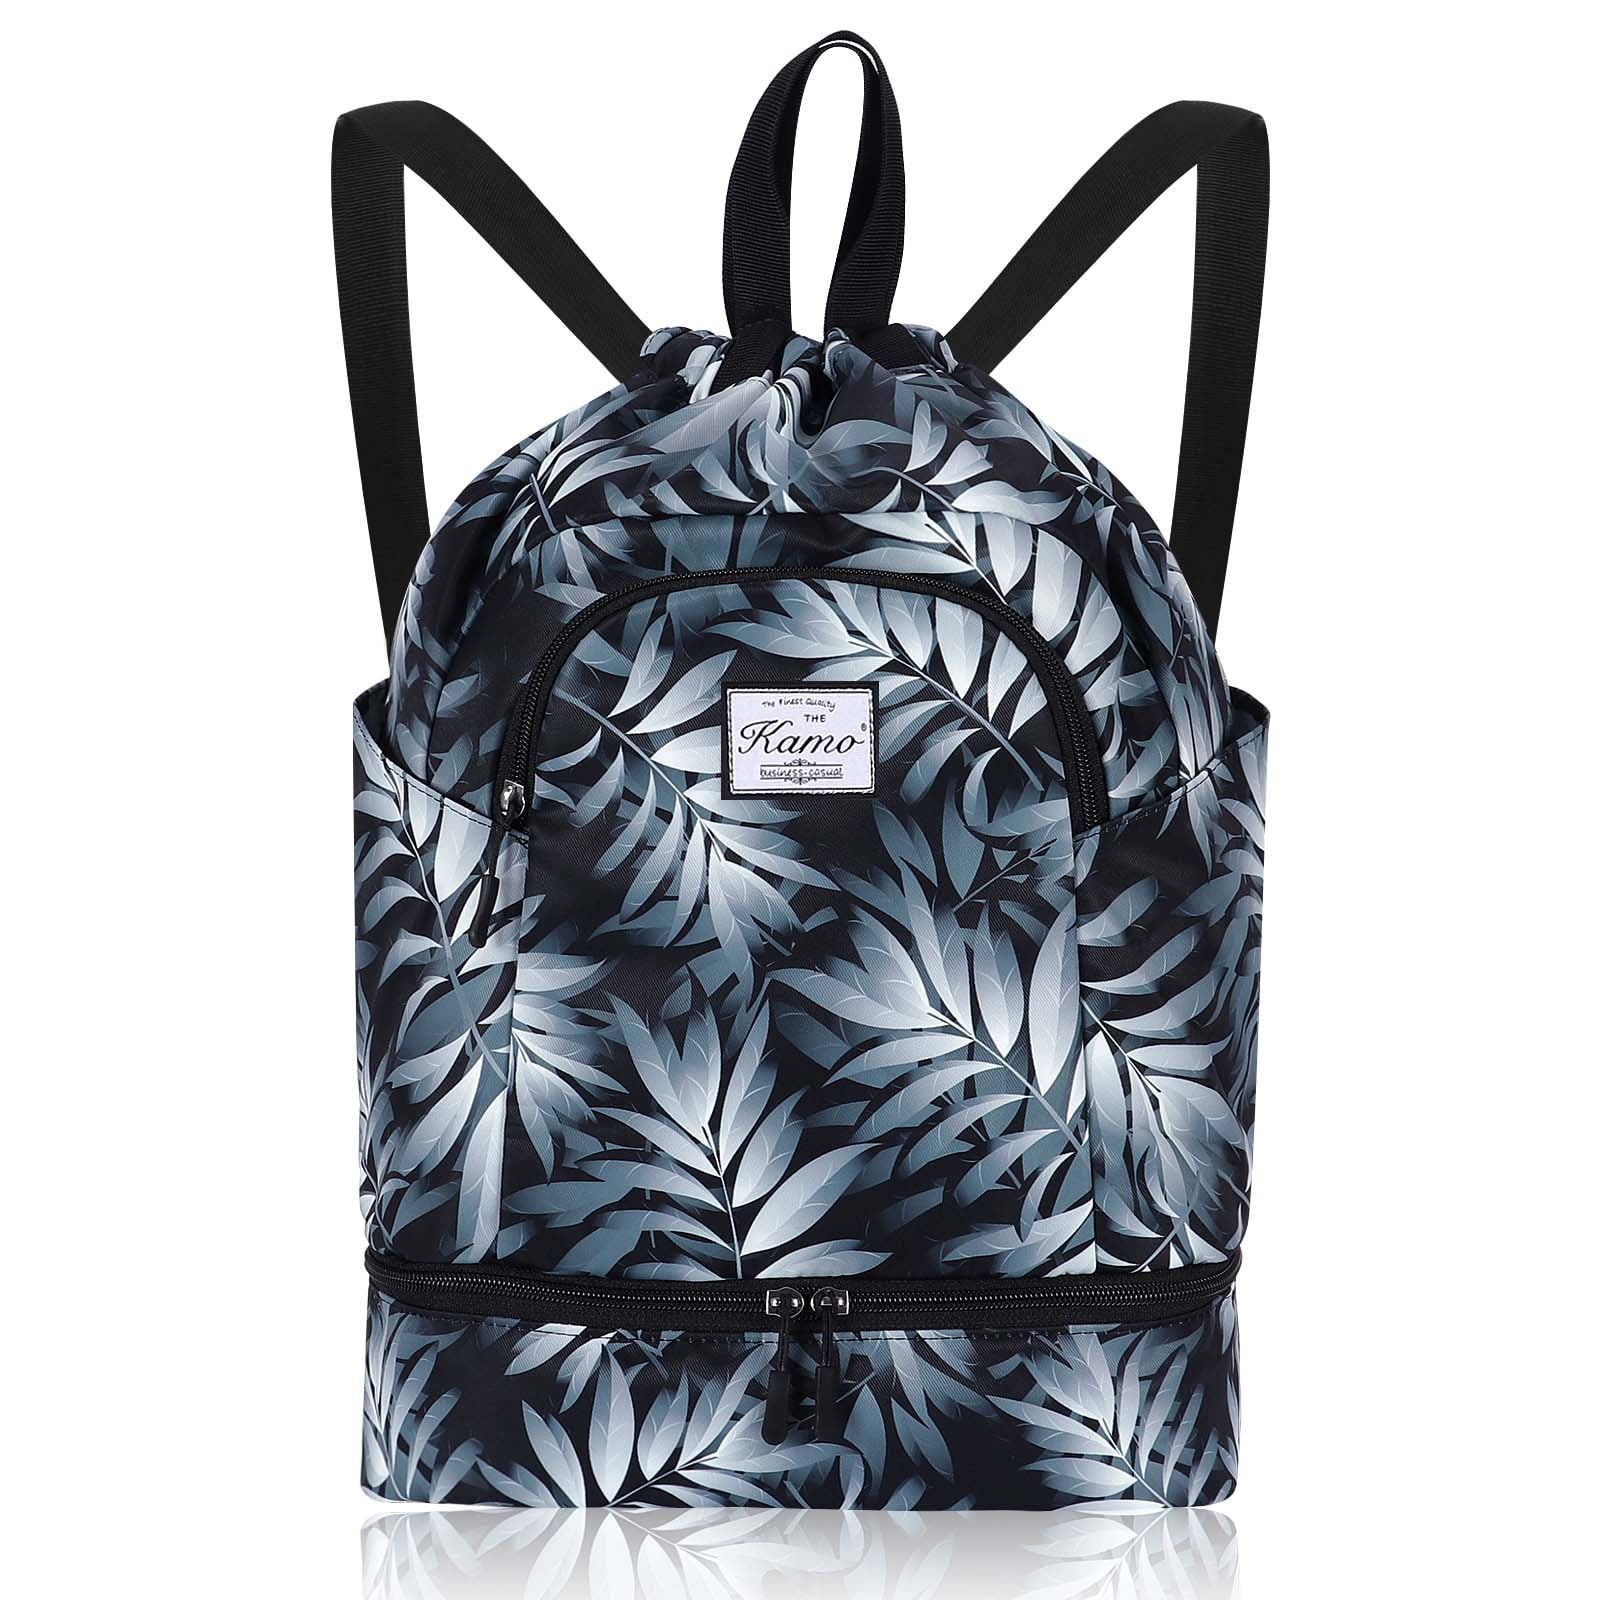 Drawstring Backpack With Monochrome Floral Print String Bag Foldable Sackpack For Gym Sport Traveling Yoga School